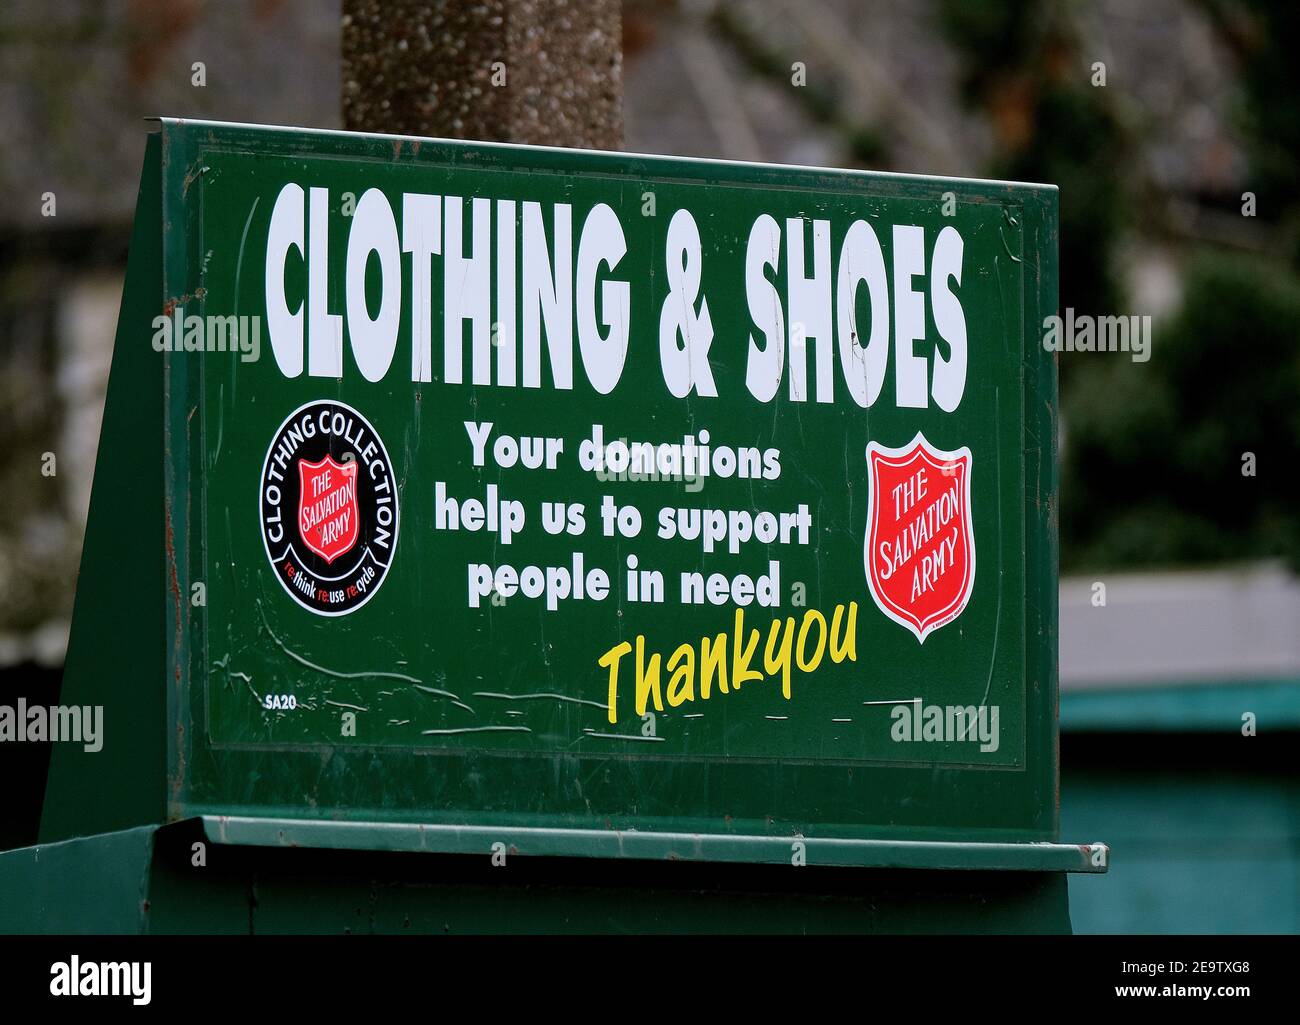 Salvation army clothing and shoe collection station in public house car park. UK. Stock Photo